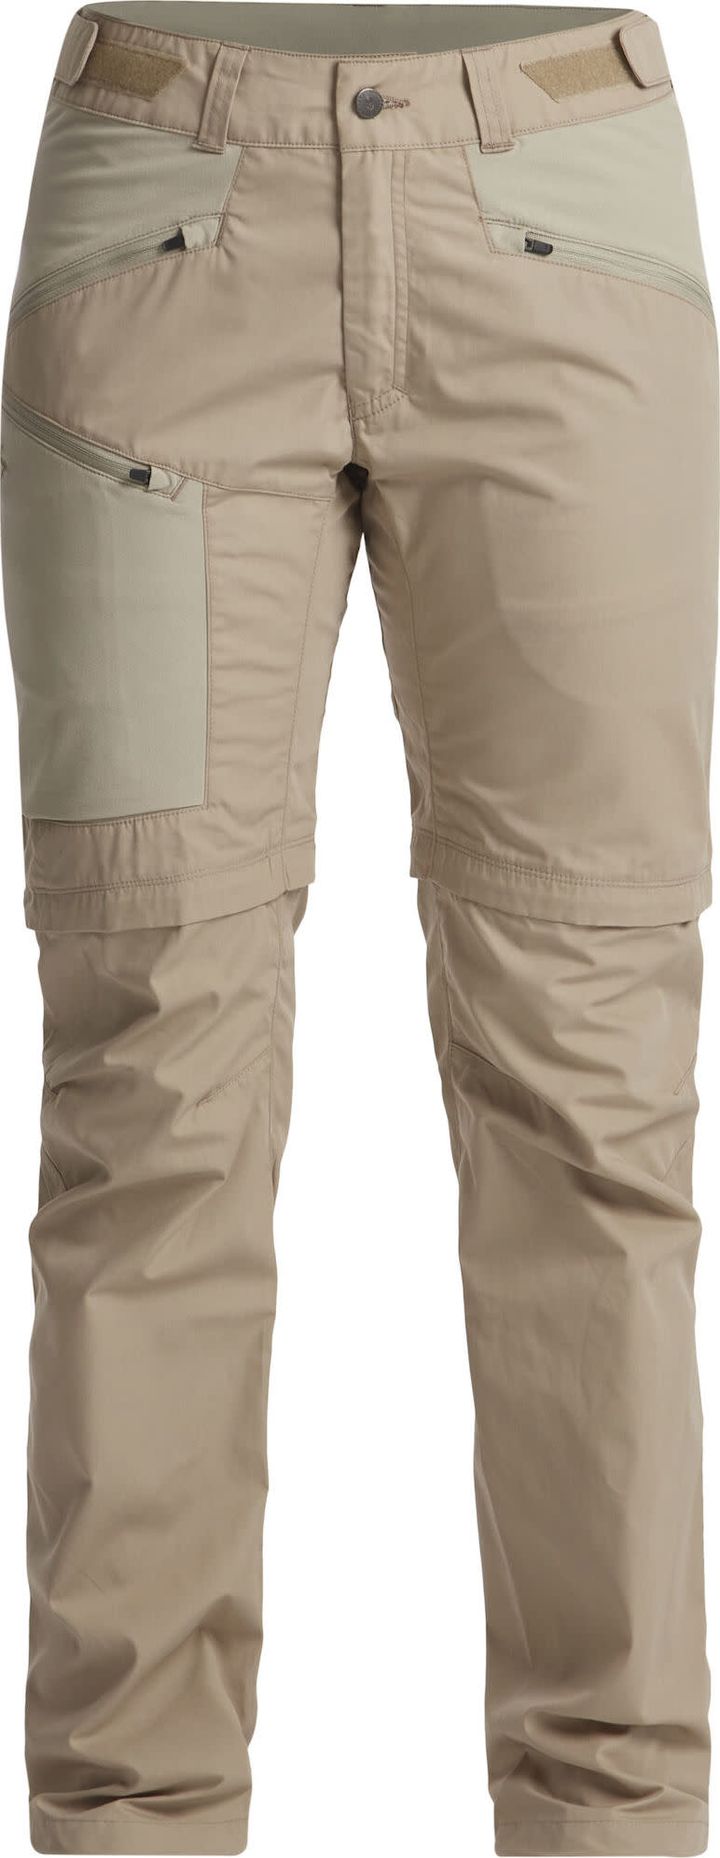 Women's Tived Zip-Off Pant  Sand Lundhags